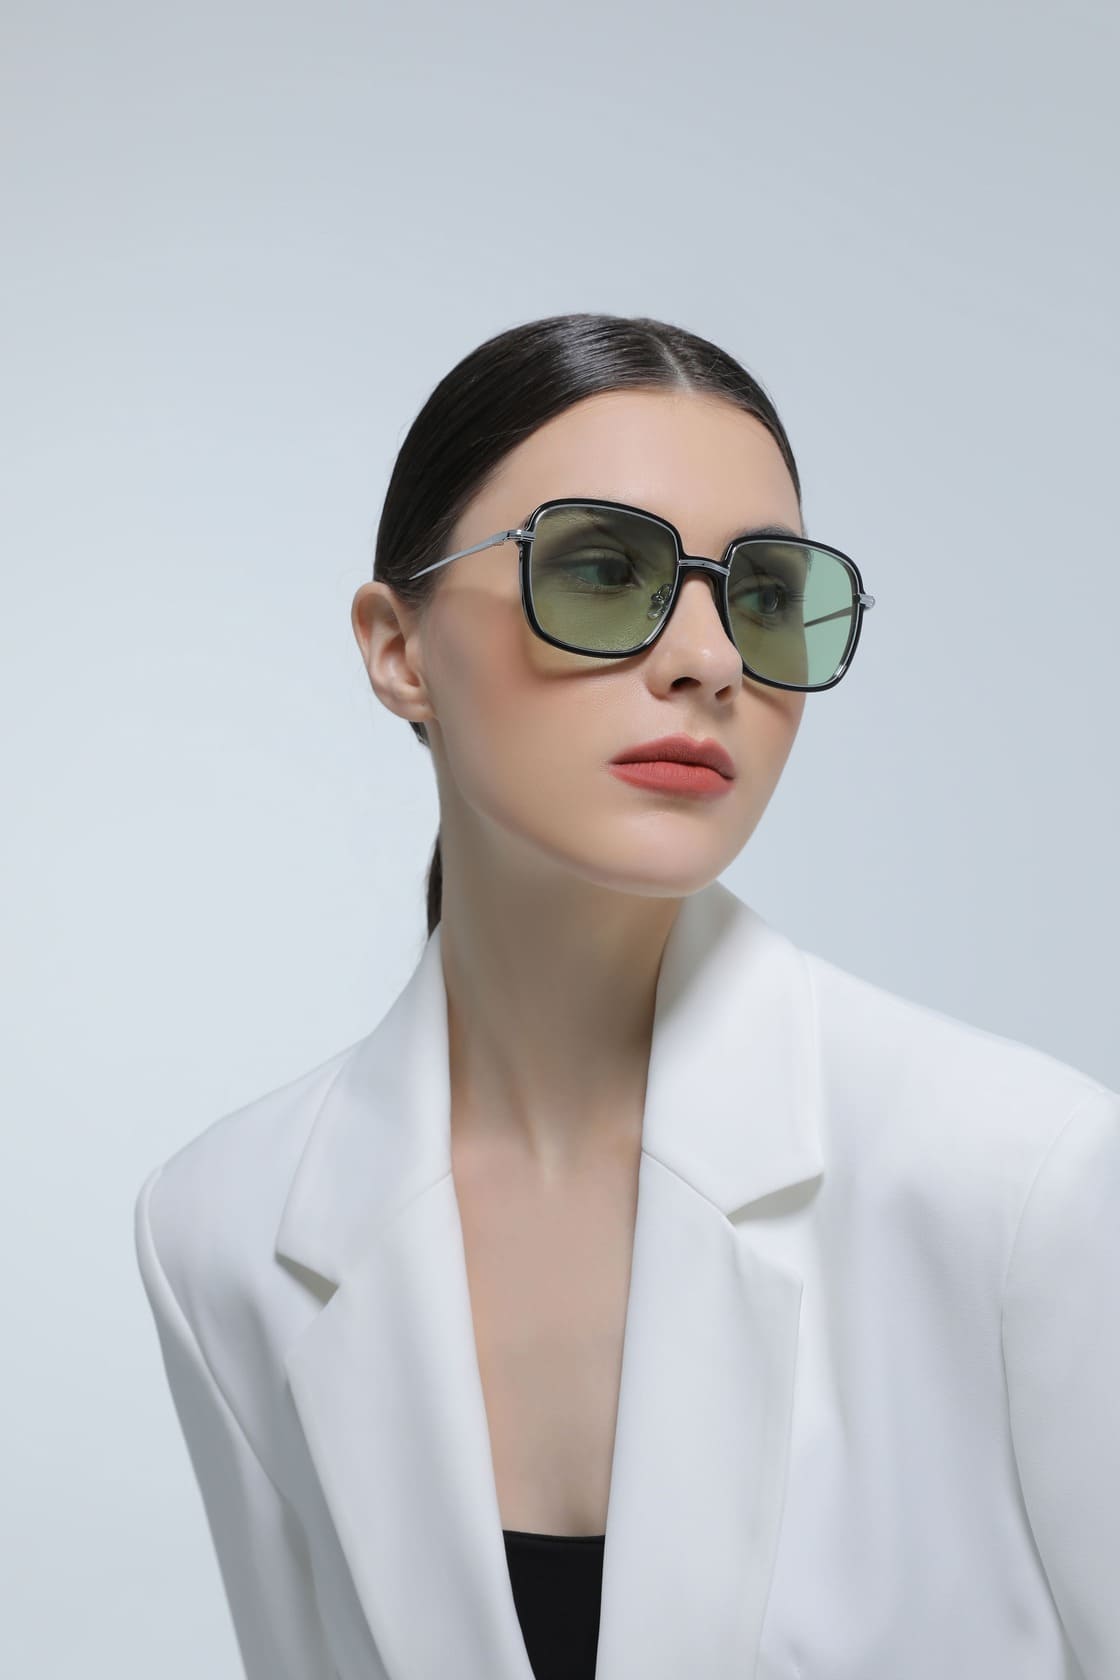 Giustizieri Vecchi's Initiative: Combating Fast Fashion with Sustainable Eyewear Solutions